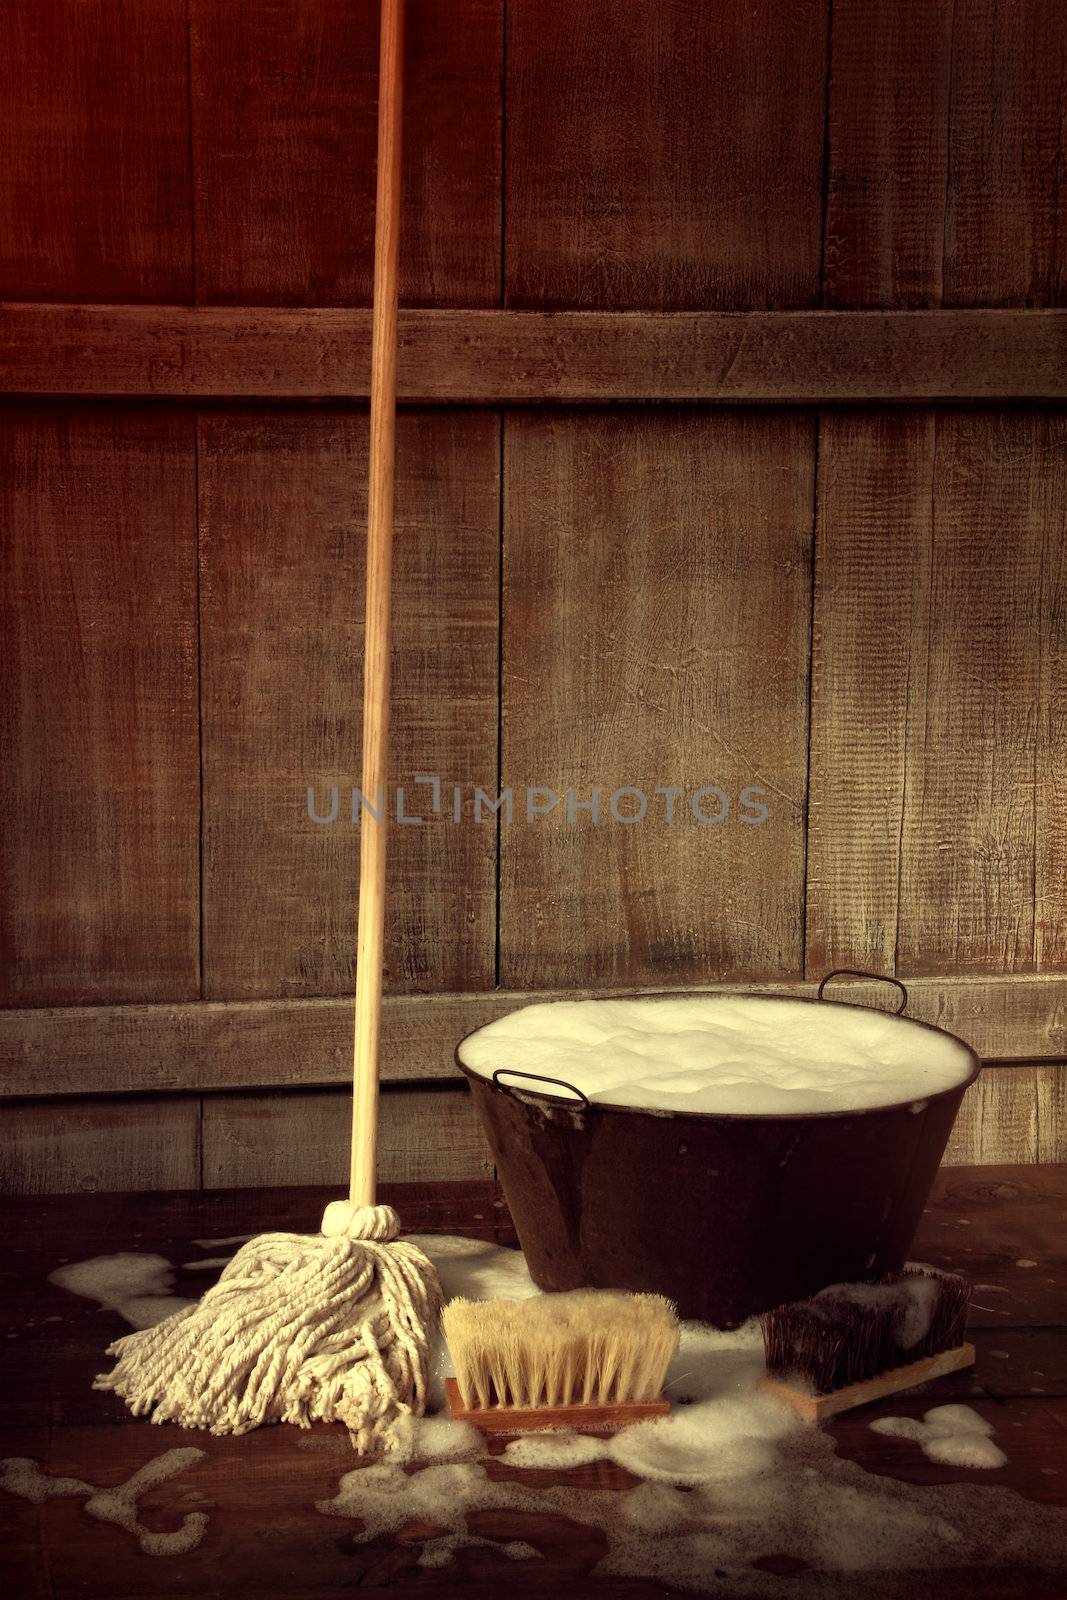 Cleaning mop and bucket with wet soapy floor by Sandralise